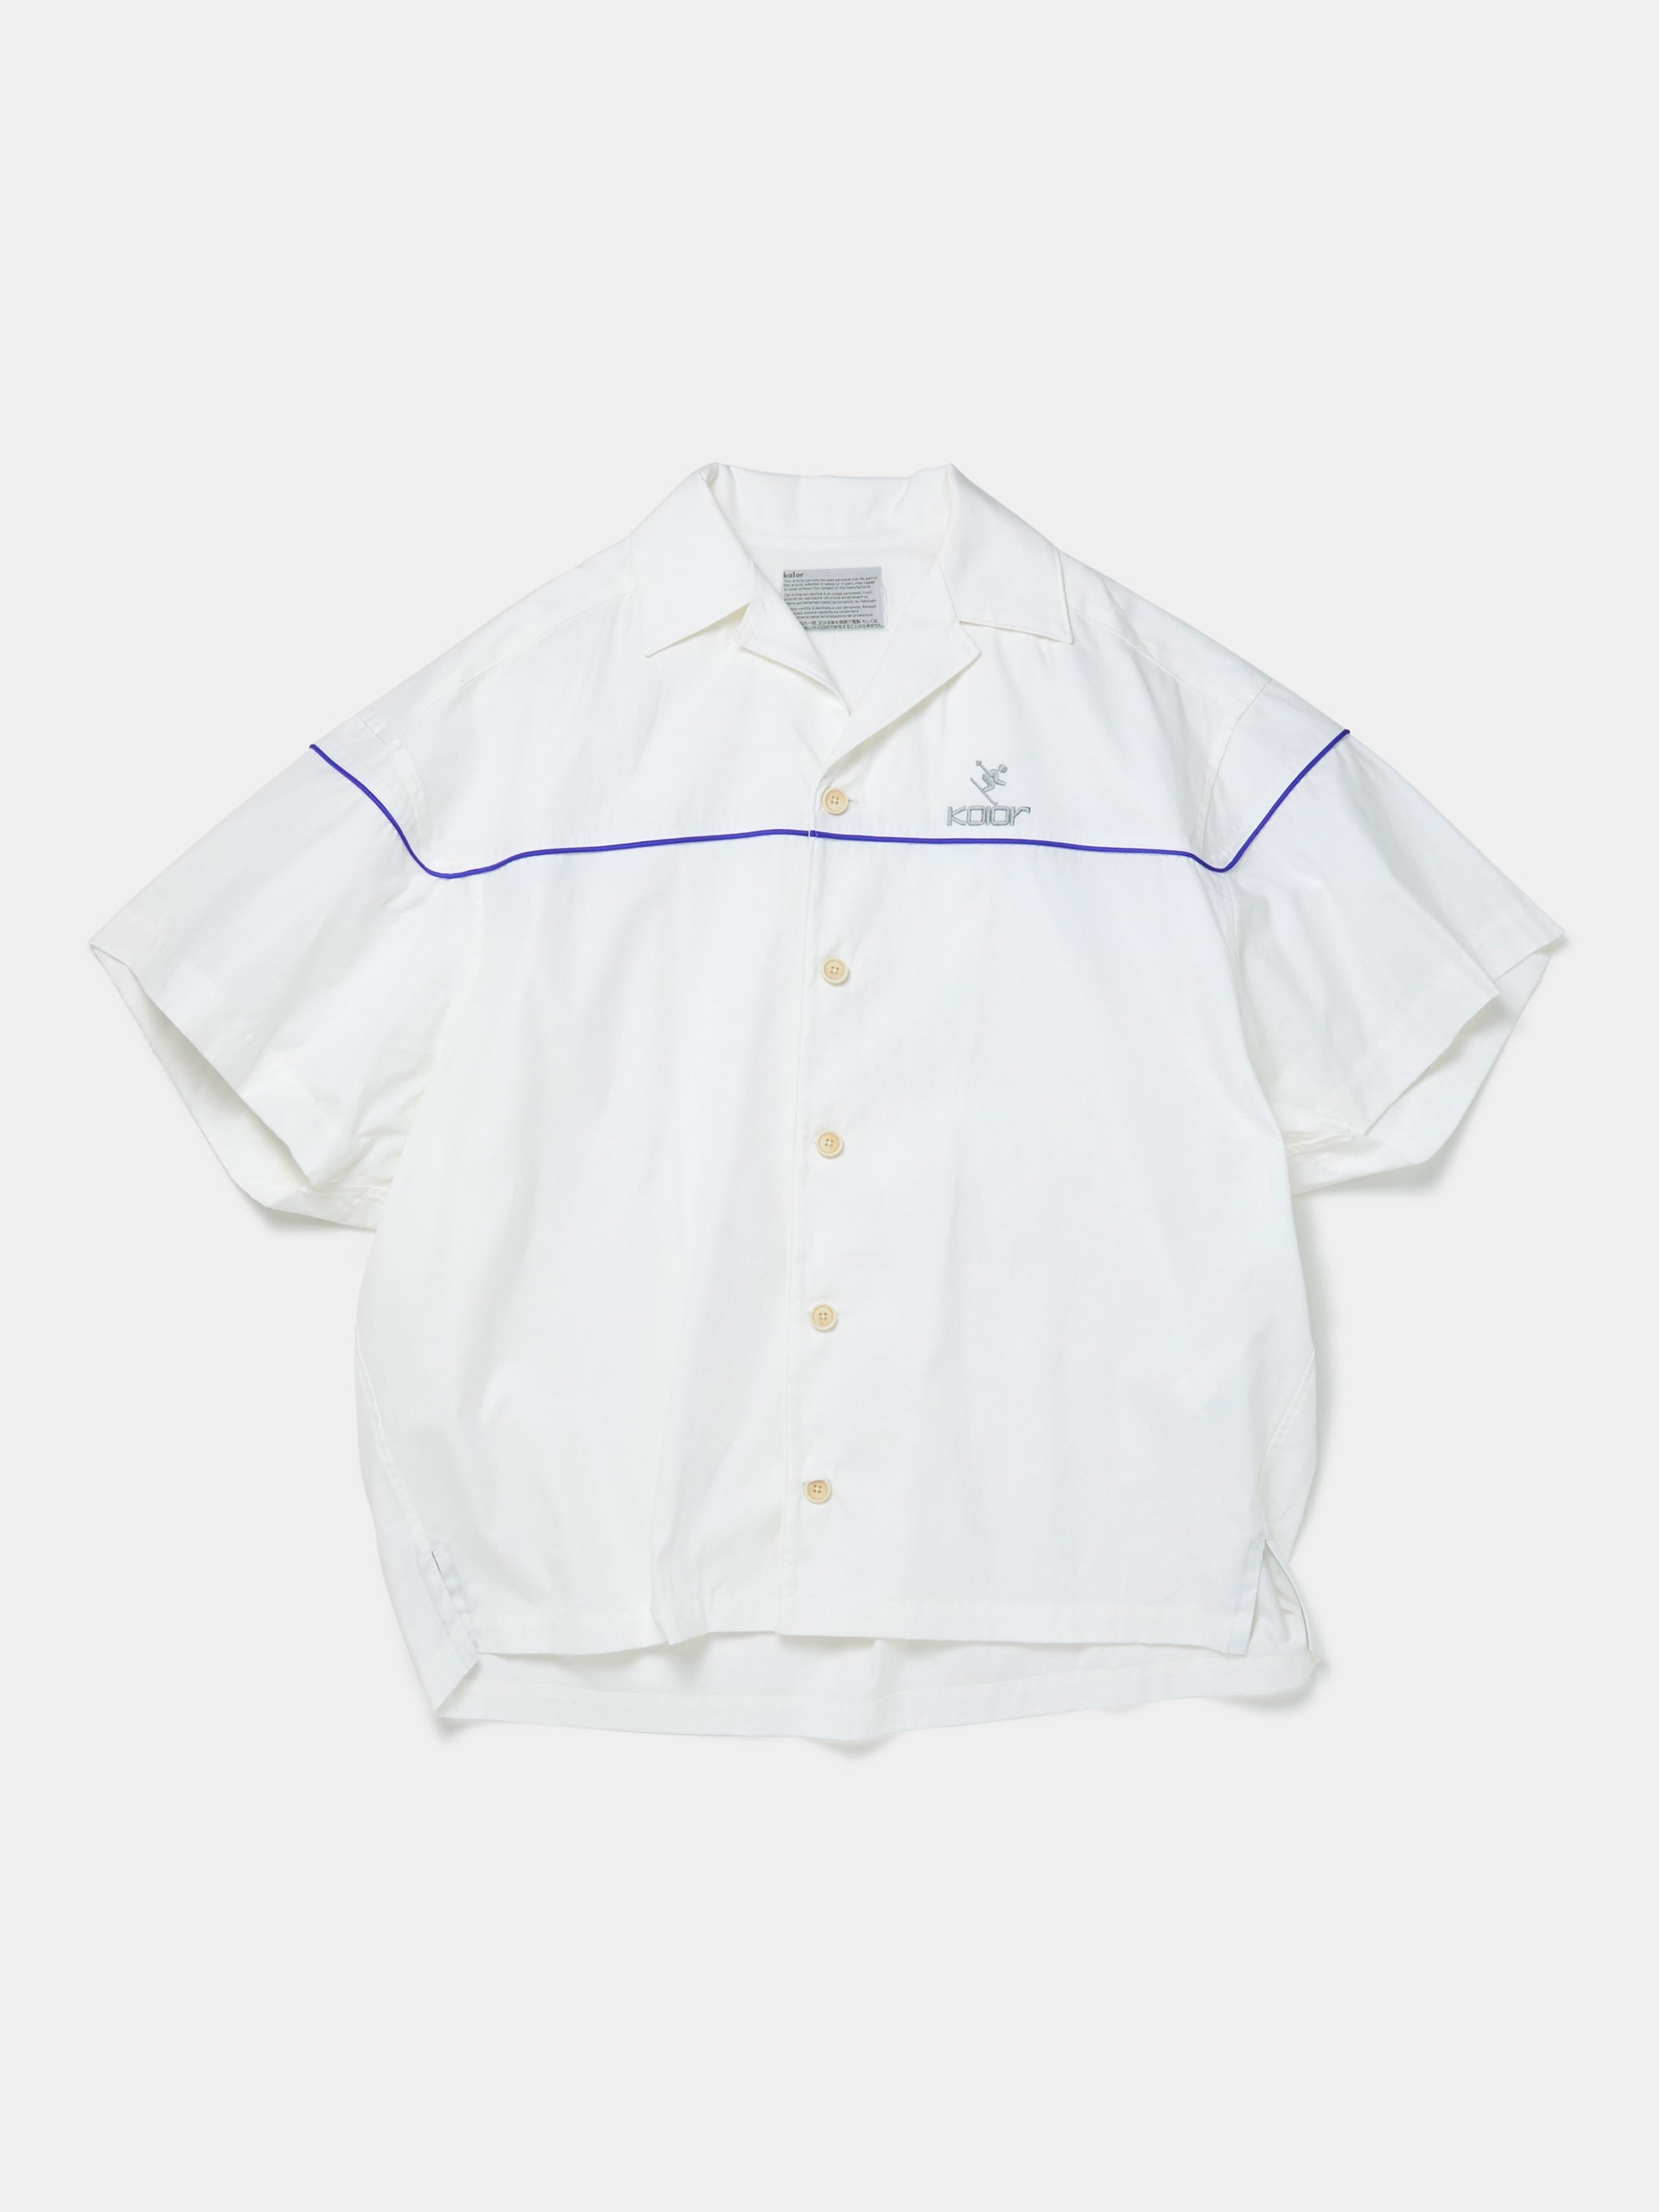 EMBROIDERED BOWLING SHIRT (WHITE) - 1